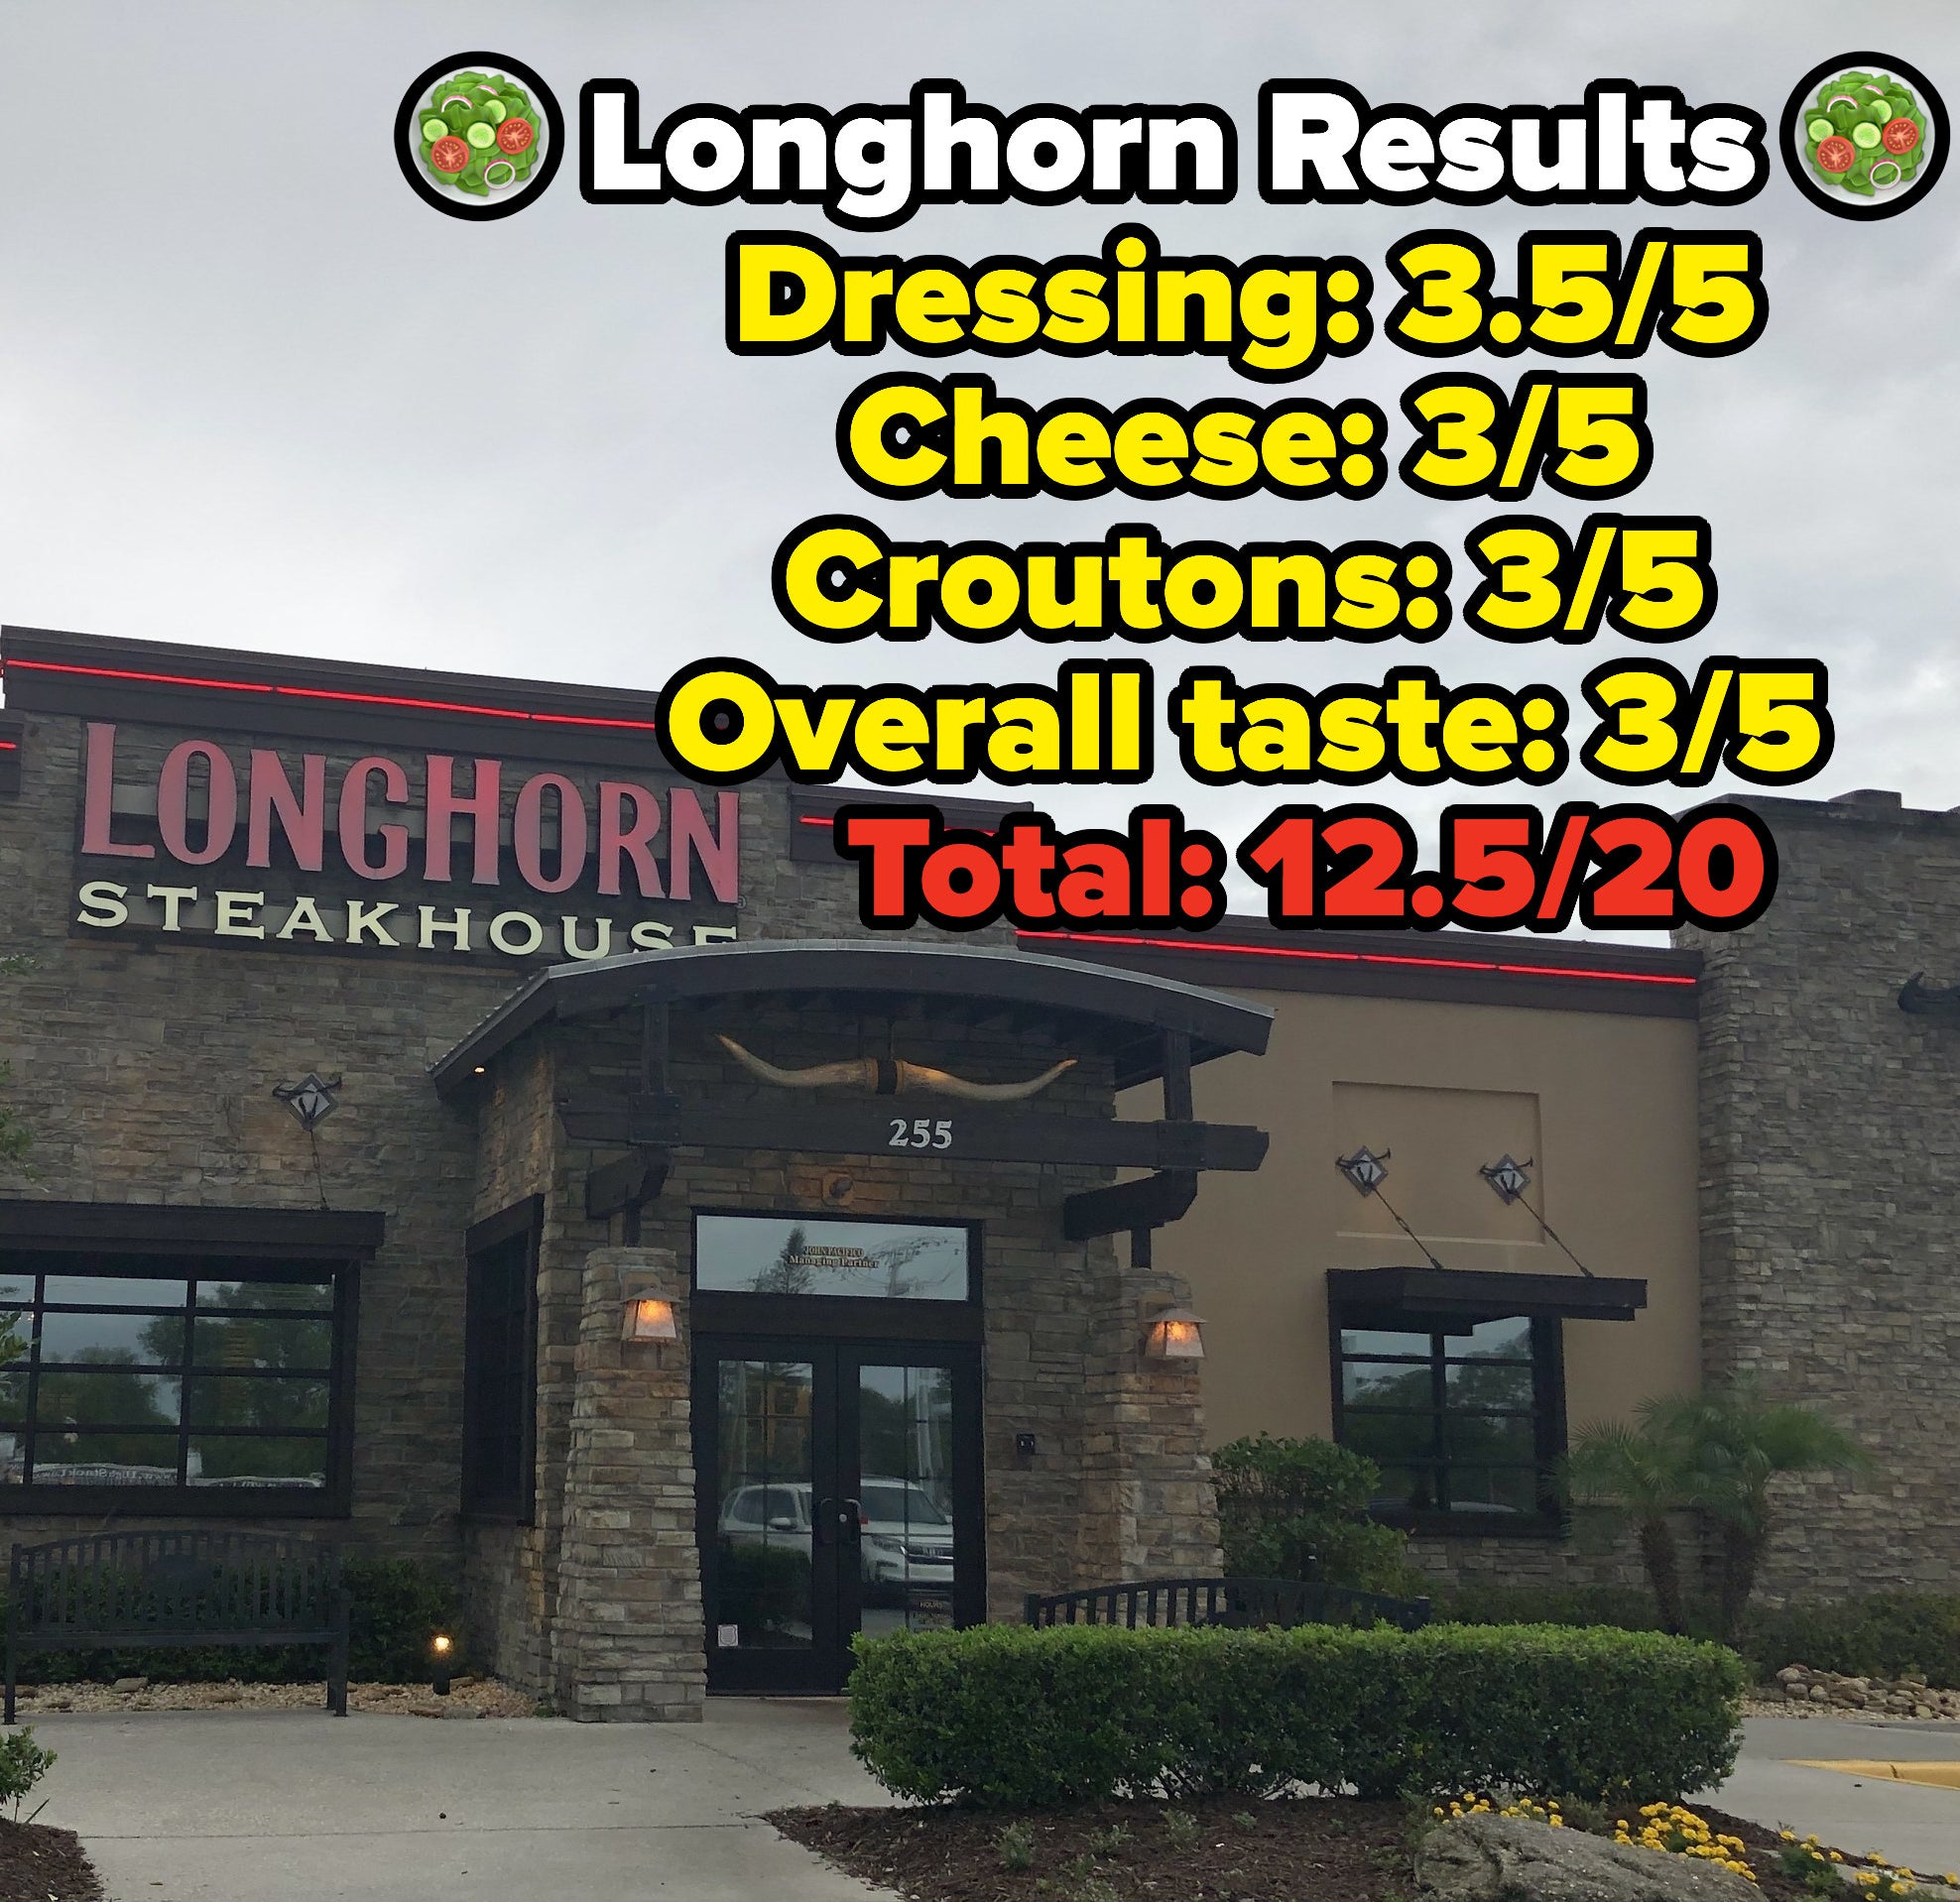 Photo of Longhorn Steakhouse with text that says &quot;Longhorn Results: dressing 3.5/5, cheese 3/5, croutons 3/5, overall taste 3/5, total 12.5/20&quot;